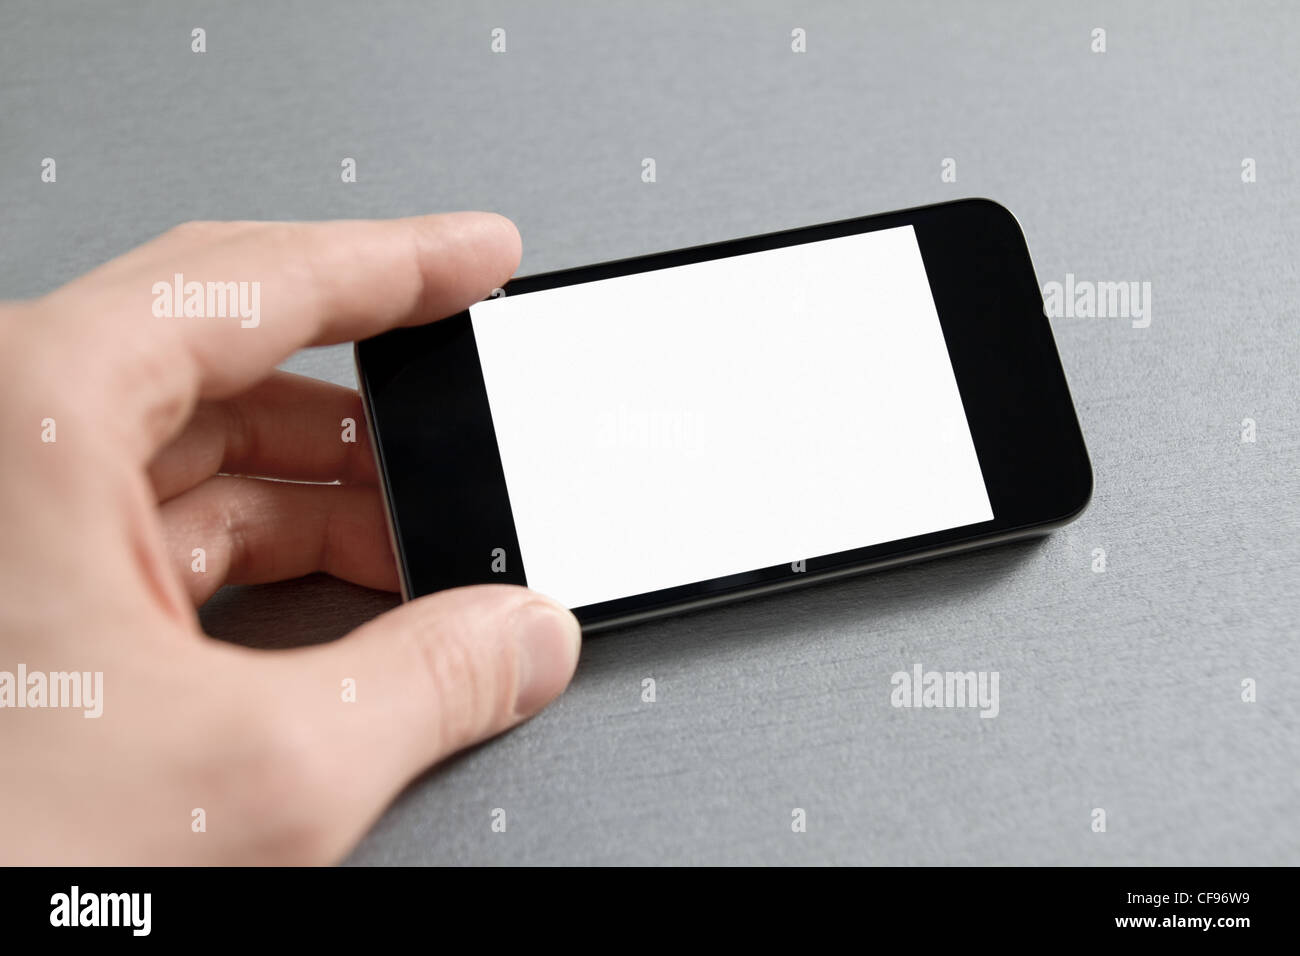 Man hand showing mobile smart phone with blank screen. Stock Photo